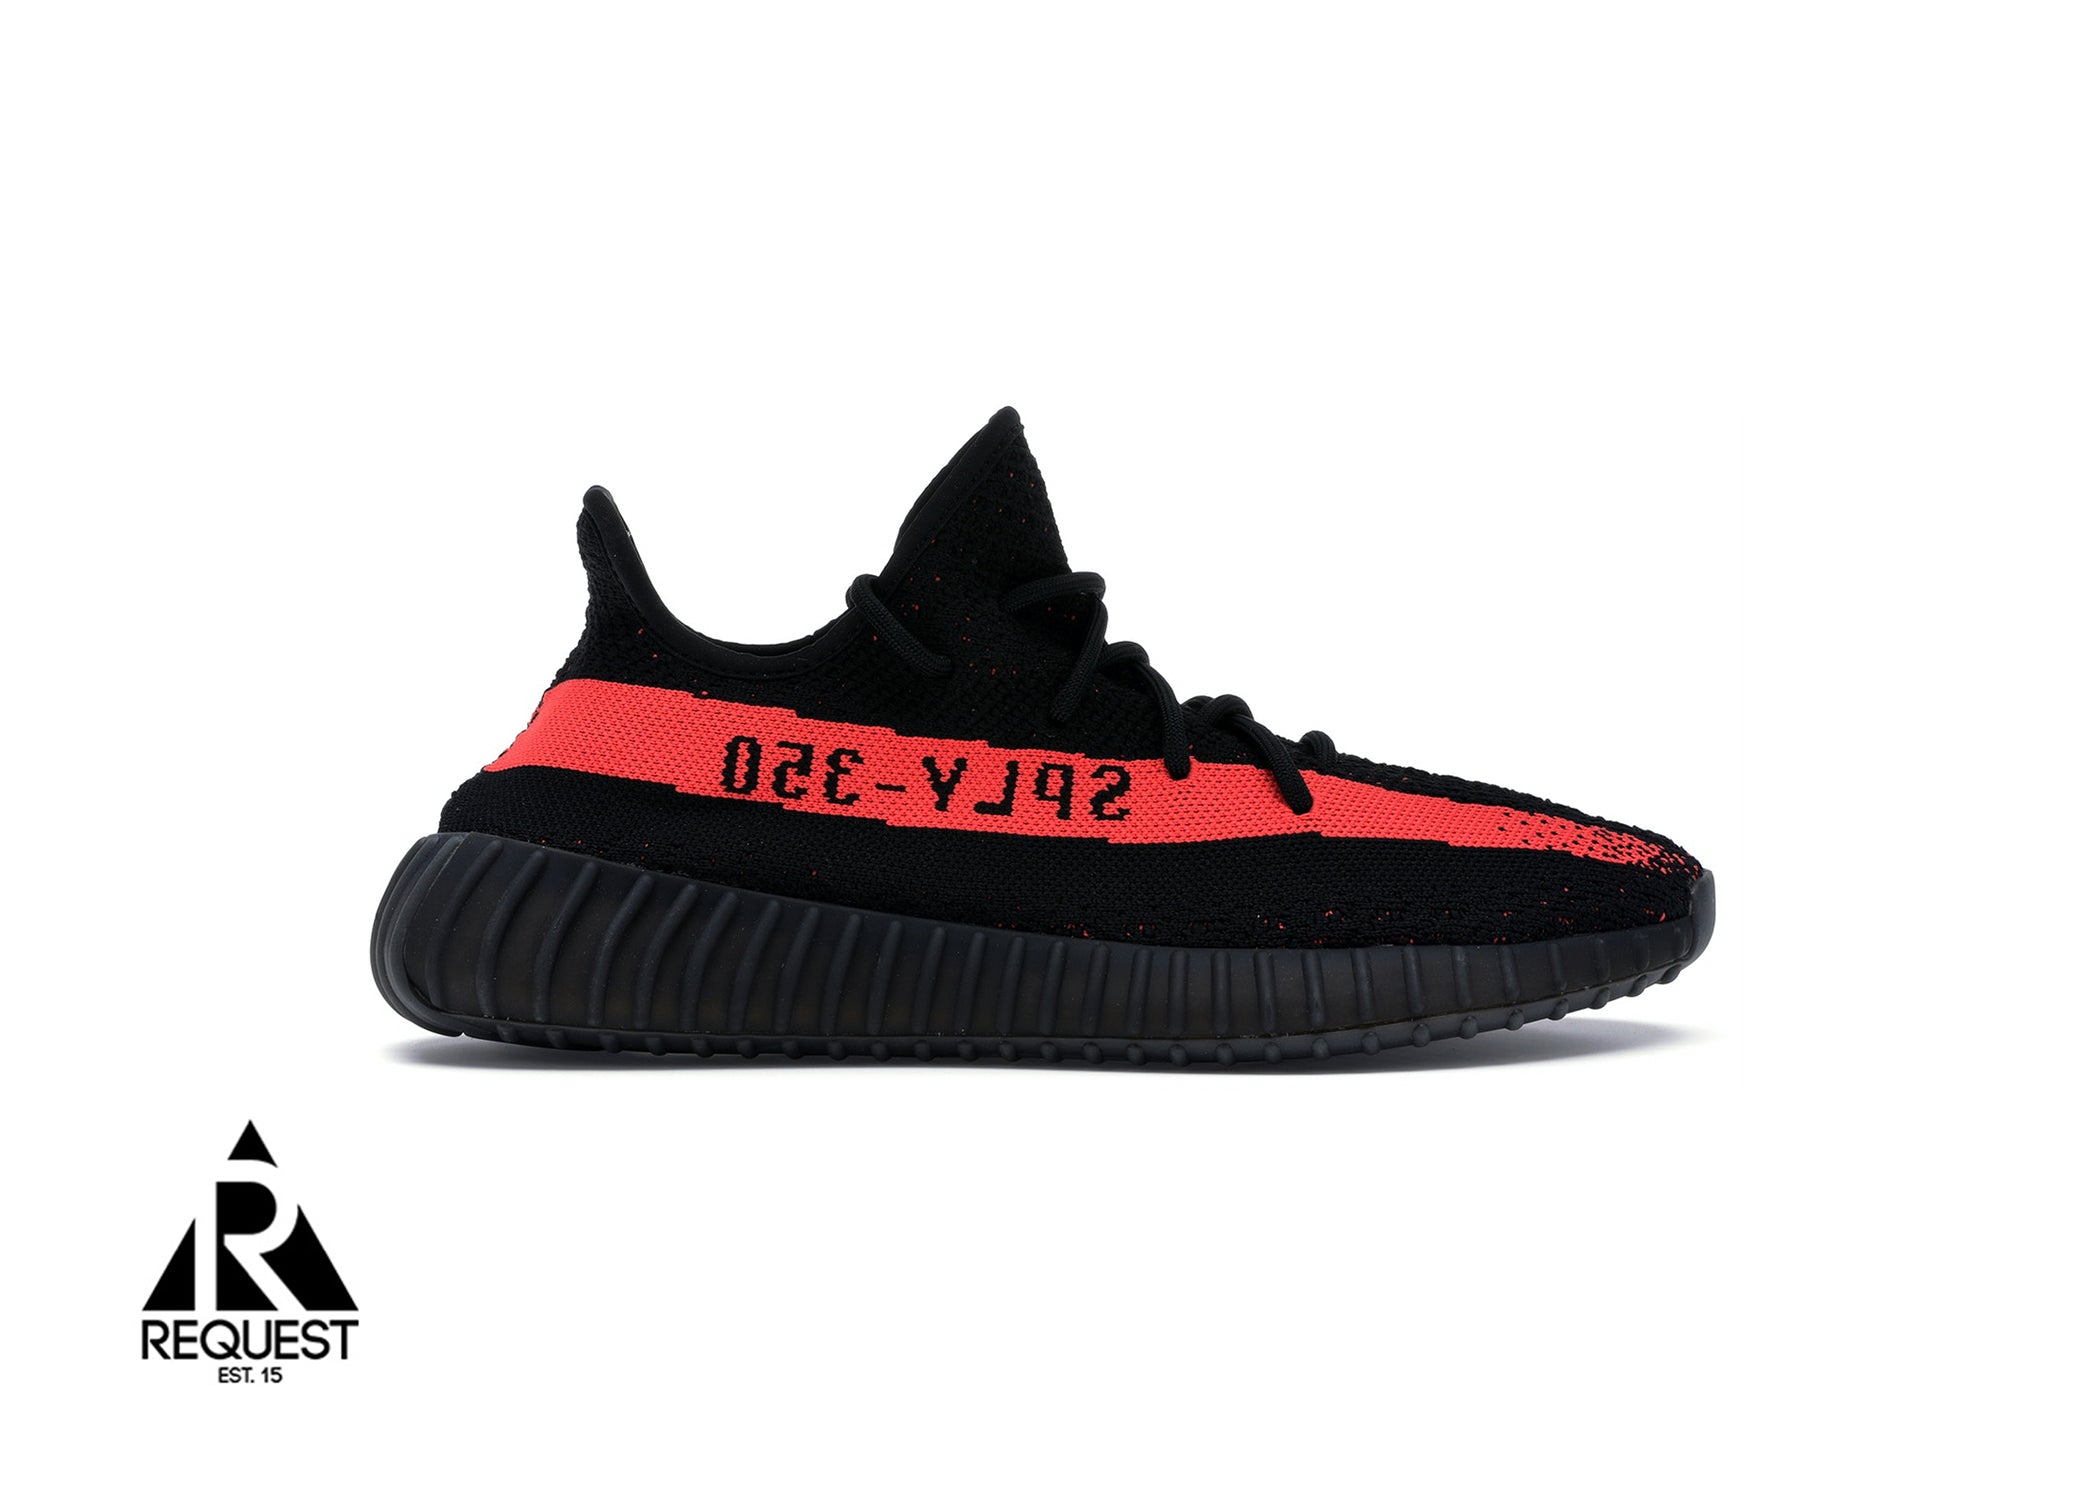 Adidas Yeezy Boost 350 “Core Black Red”